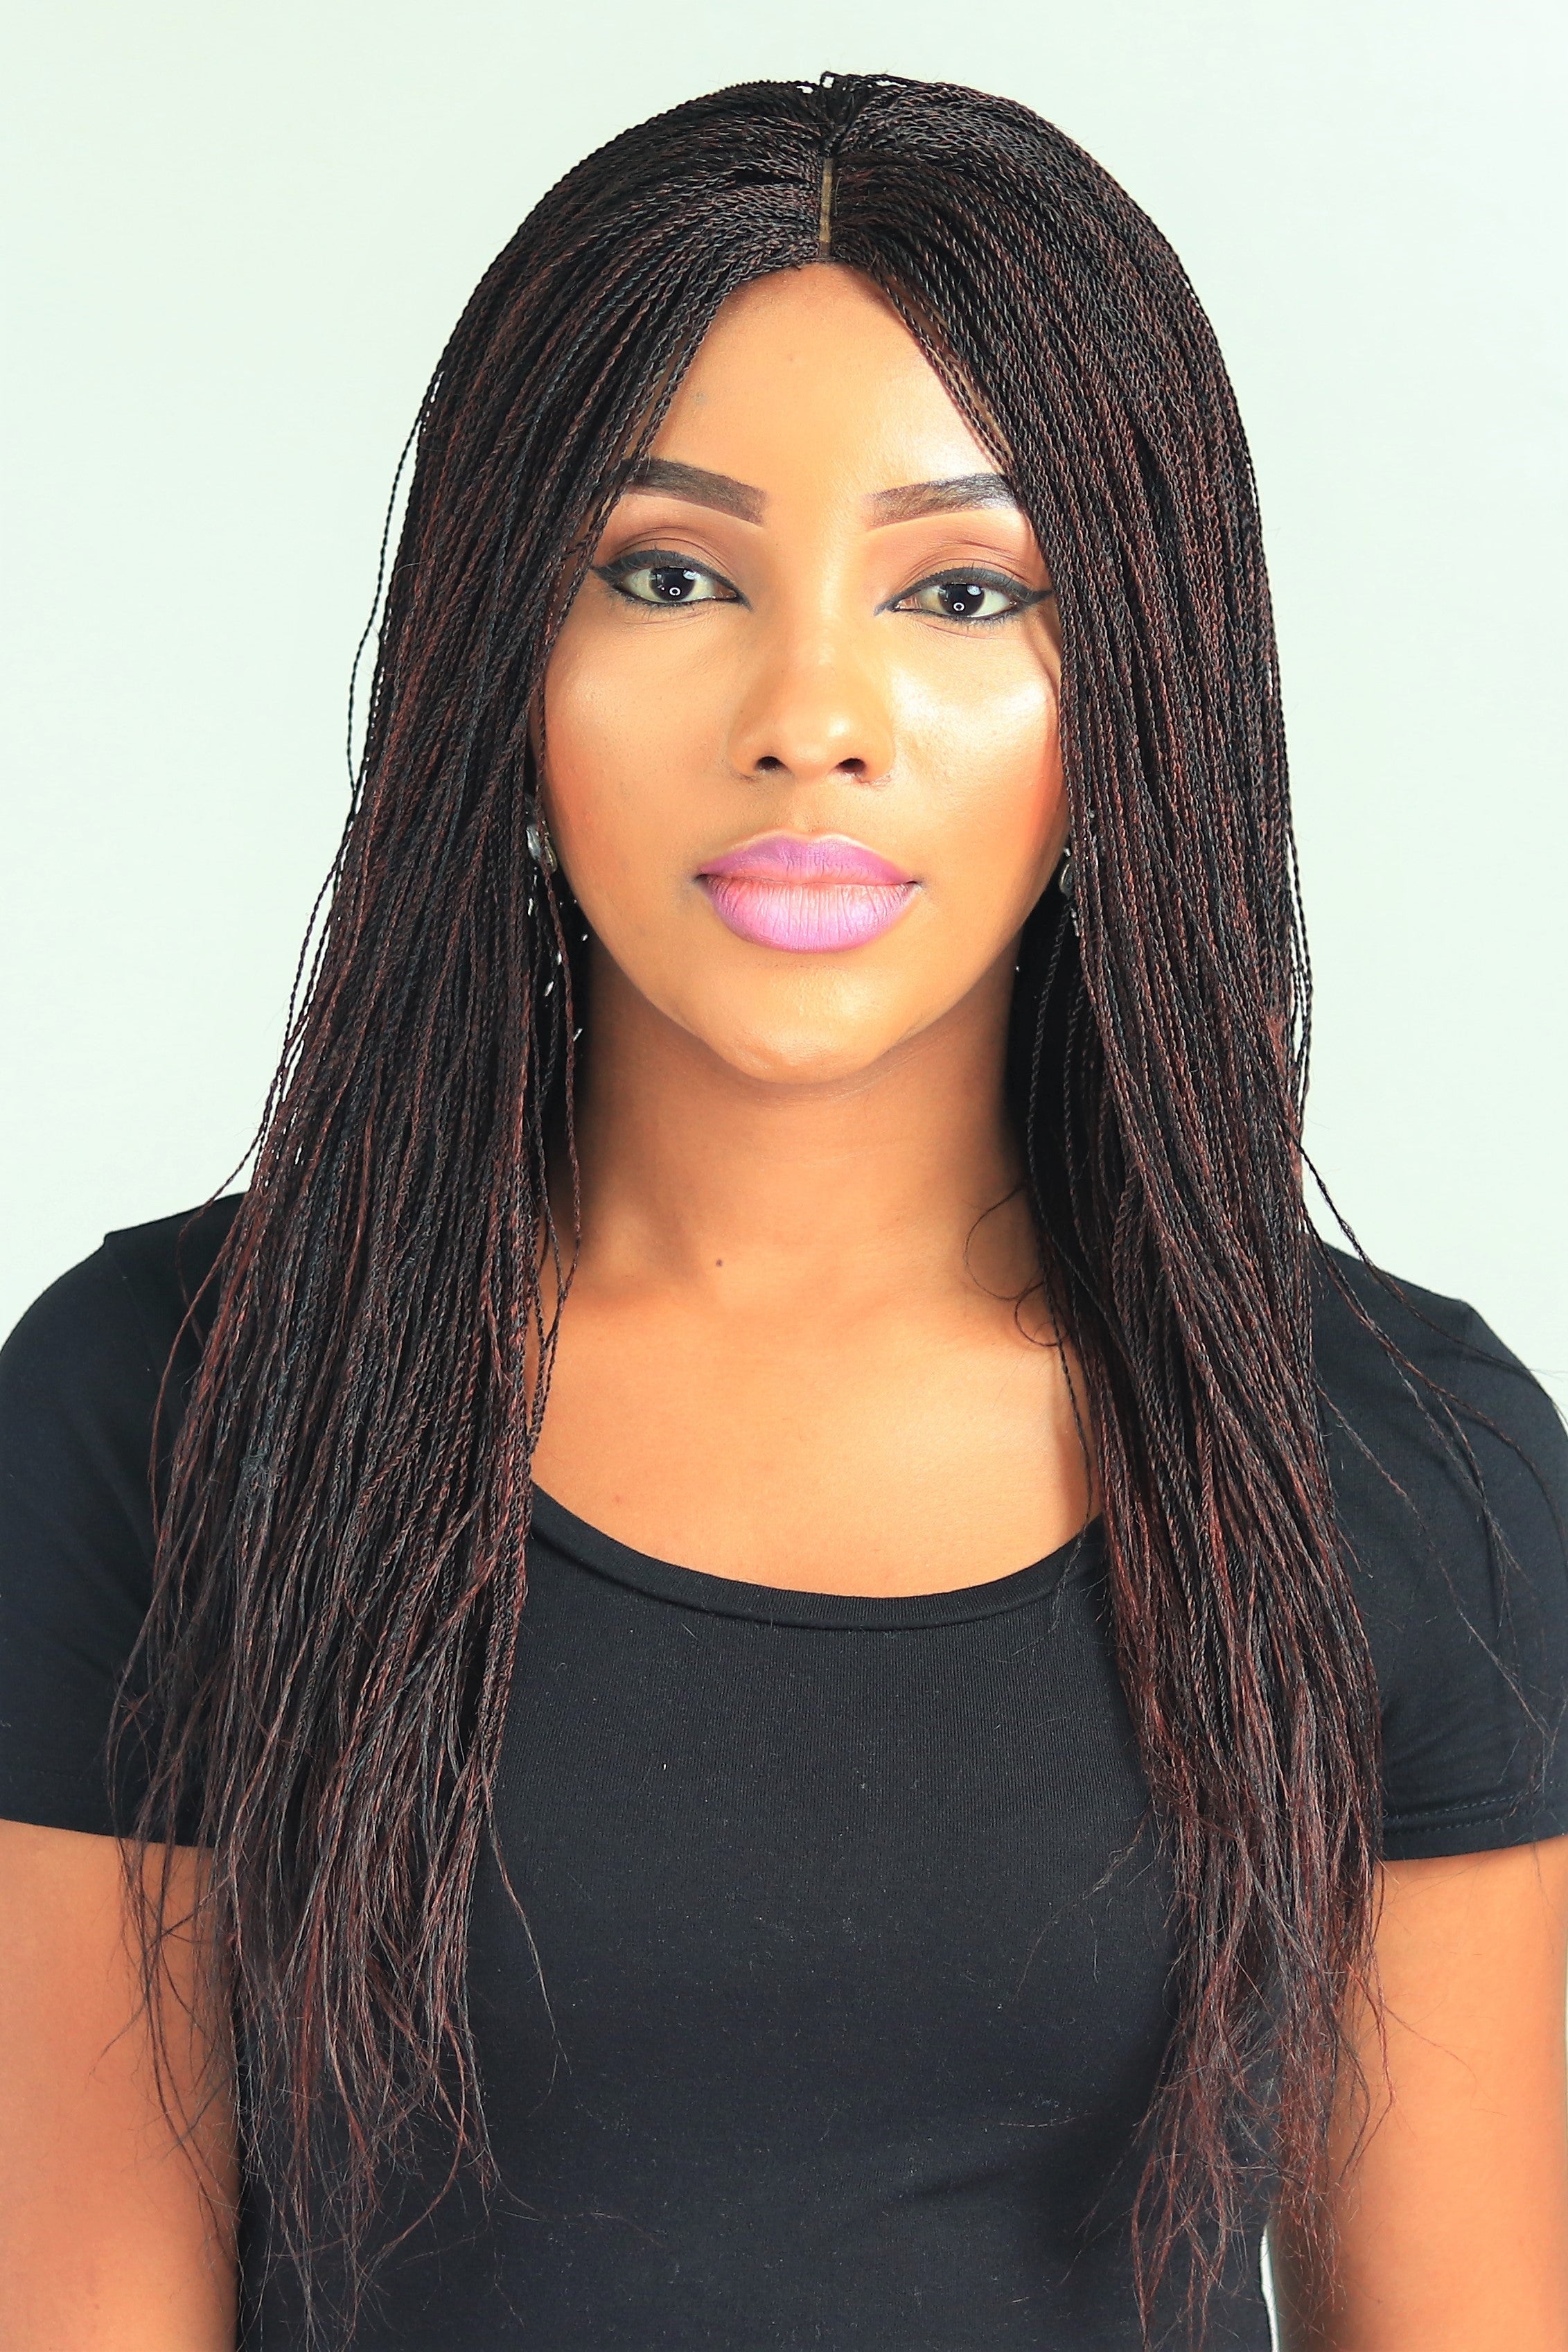 Braided Wig,cornrow Wig Box Braided Wig Ombre Wigs Passion Twists Wig Faux  Locs Wig Goddess Locs Wig Senegalese Twists Wig Lace Front Wigs -   Australia